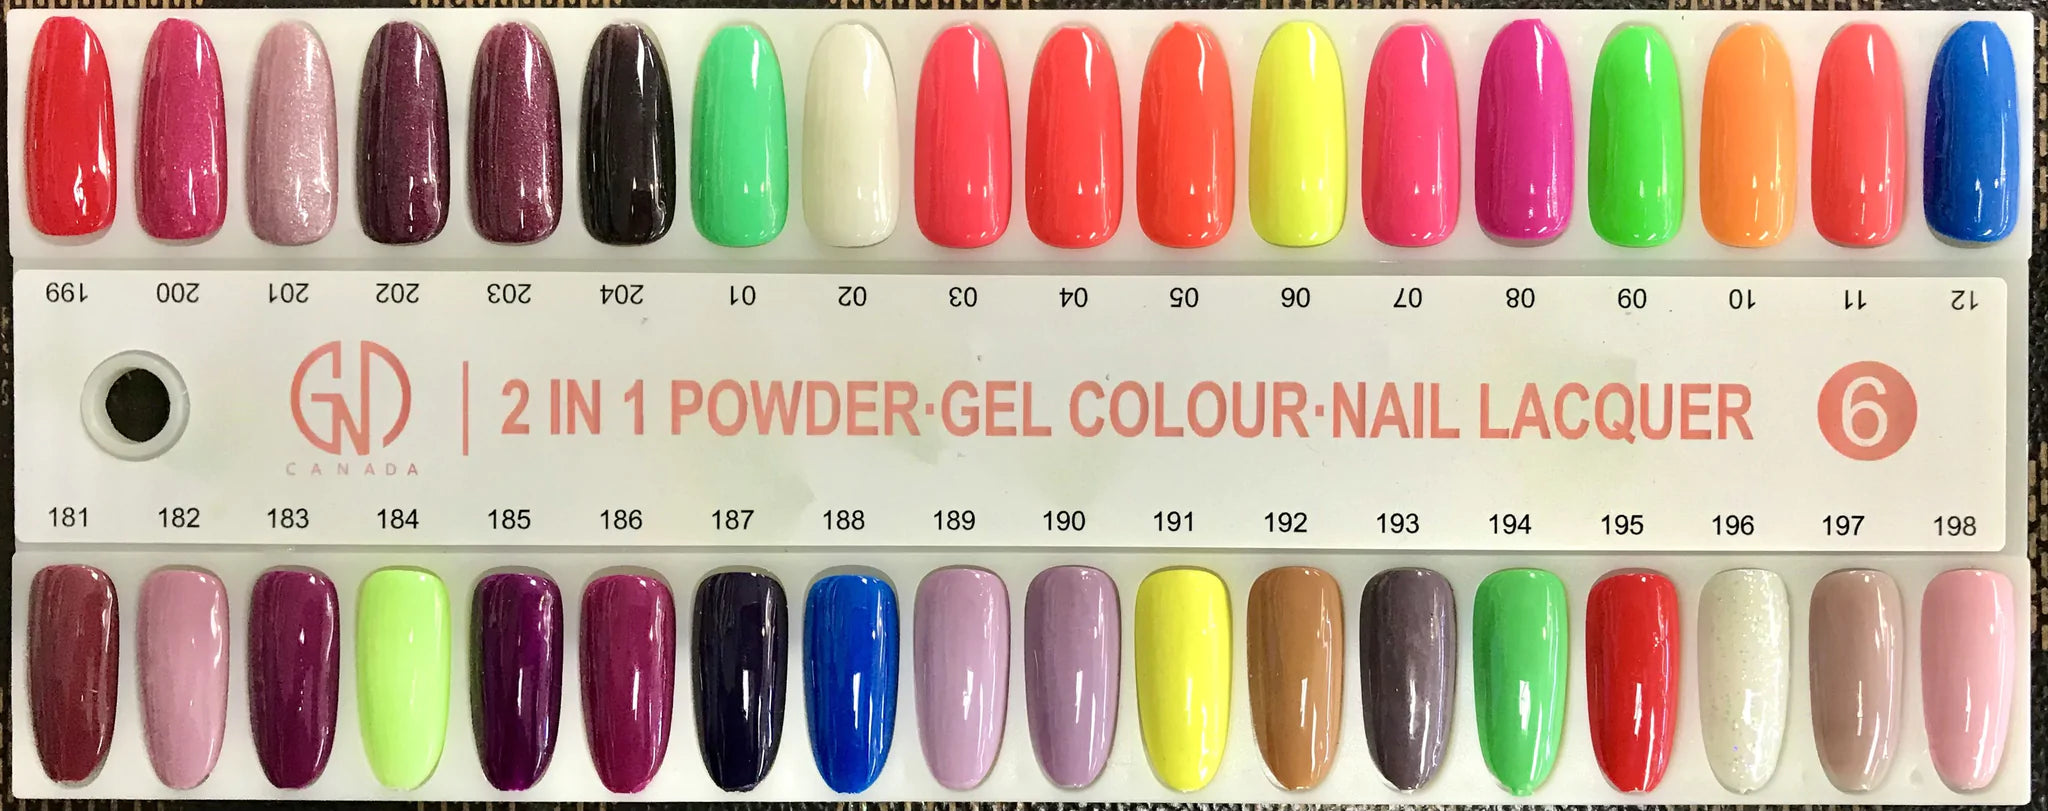 GND Duo Gel & Lacquer 186